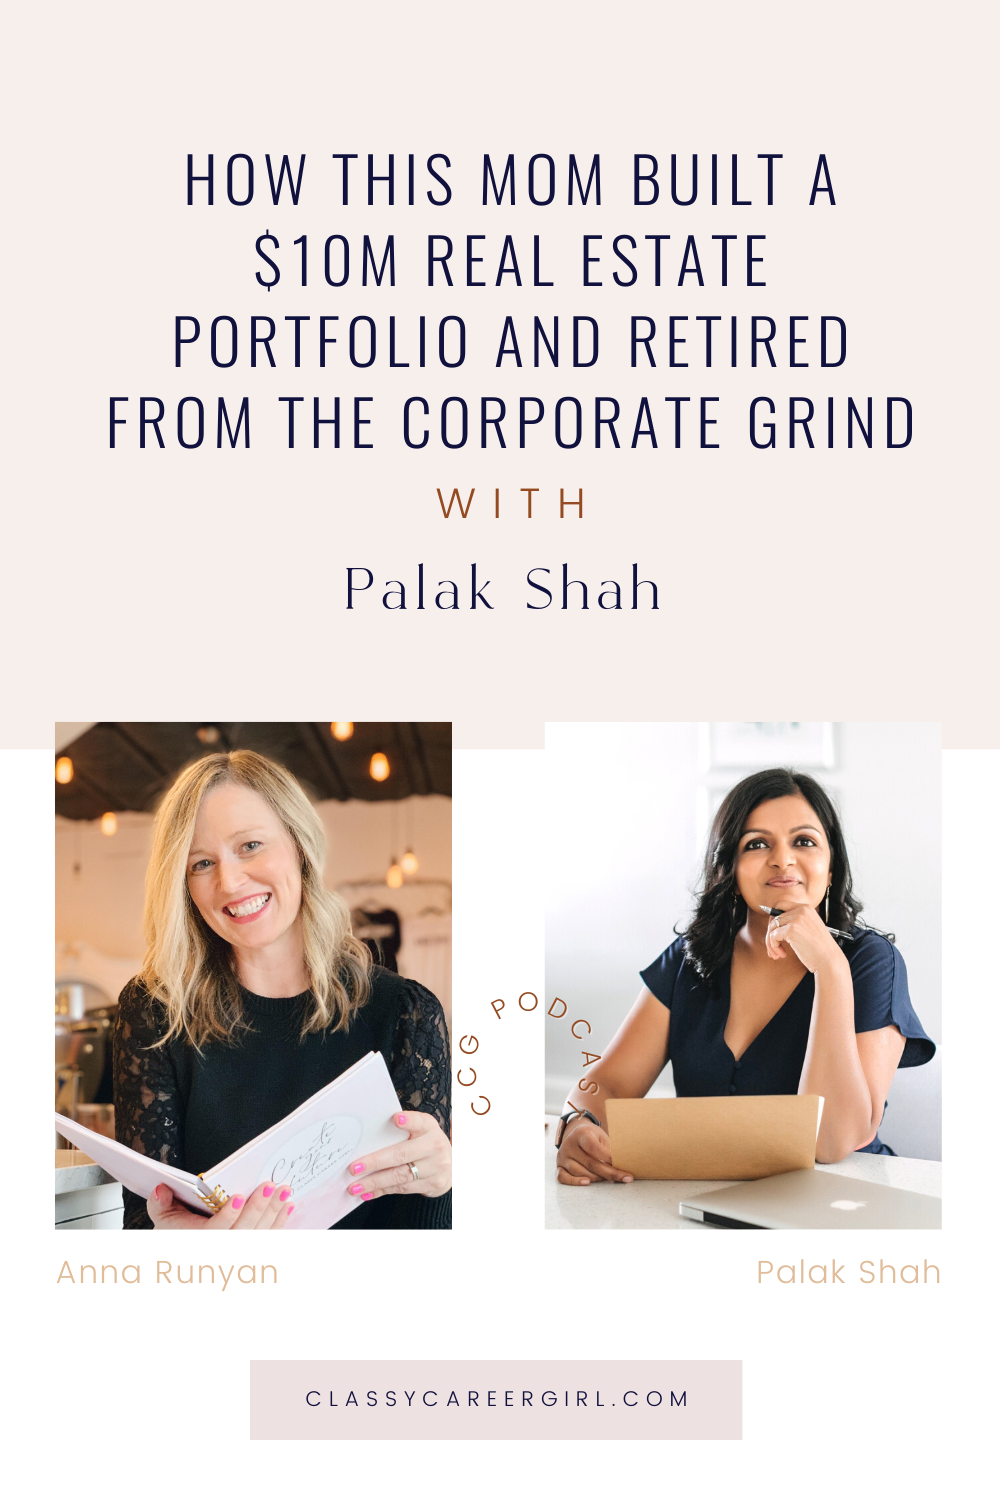 Anna Runyan interviews Palak Shah about how to become financially independent since Shah has built a $10 million real estate portfolio and quit the corporate grind.